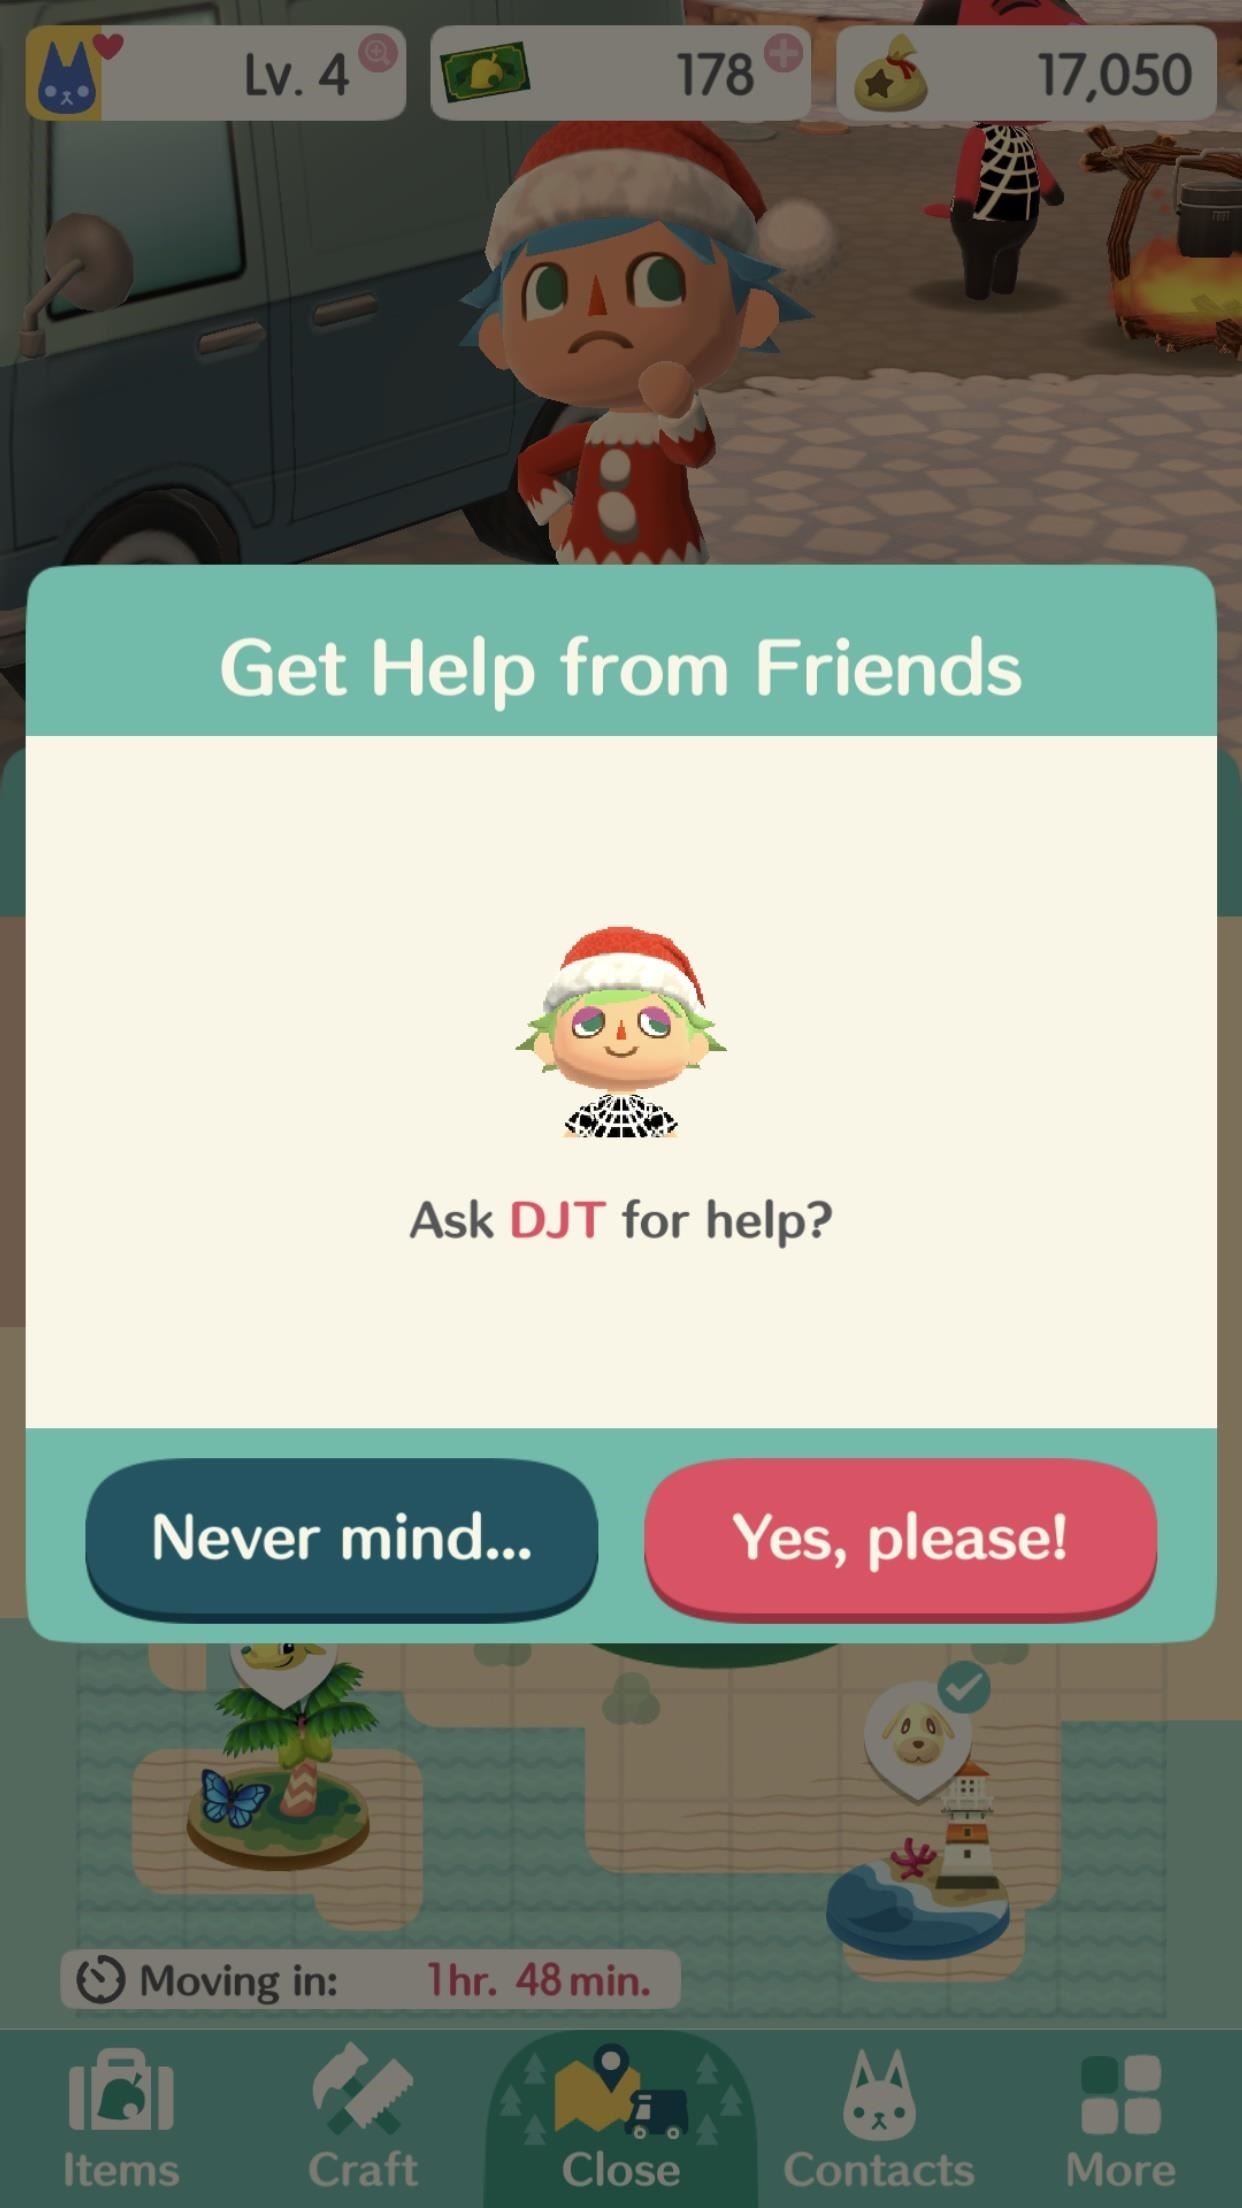 Pocket Camp 101: Making the Most of Other Players in Animal Crossing